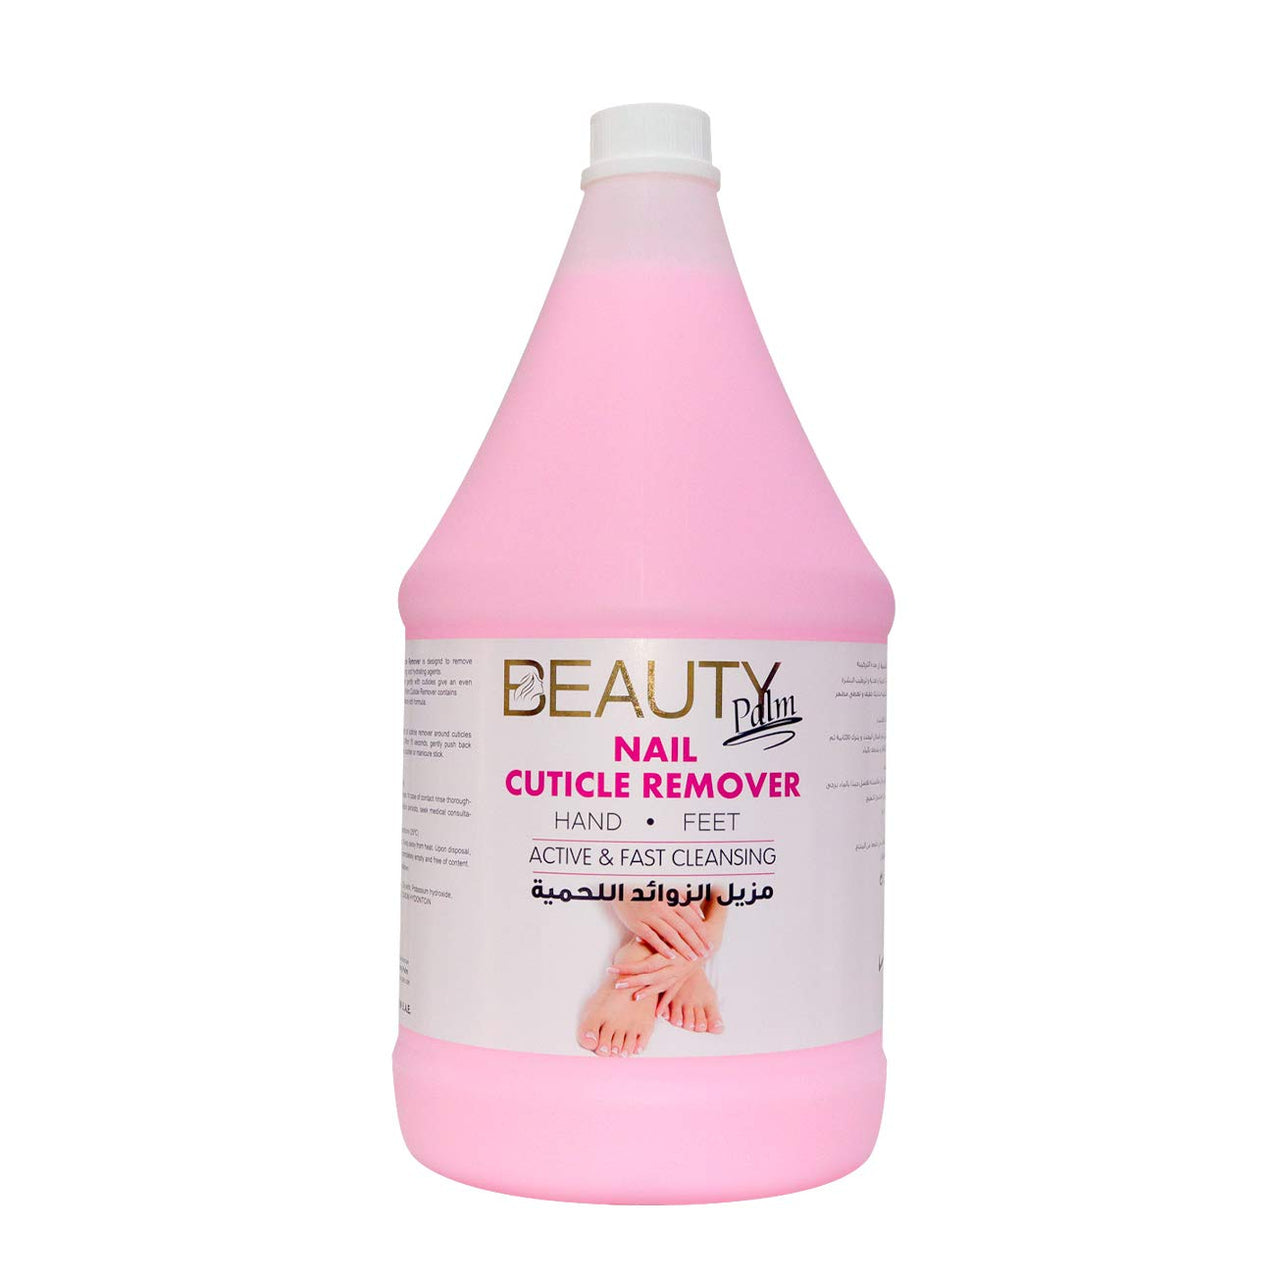 Beauty Palm Cuticle Remover 1gal - Pink / White